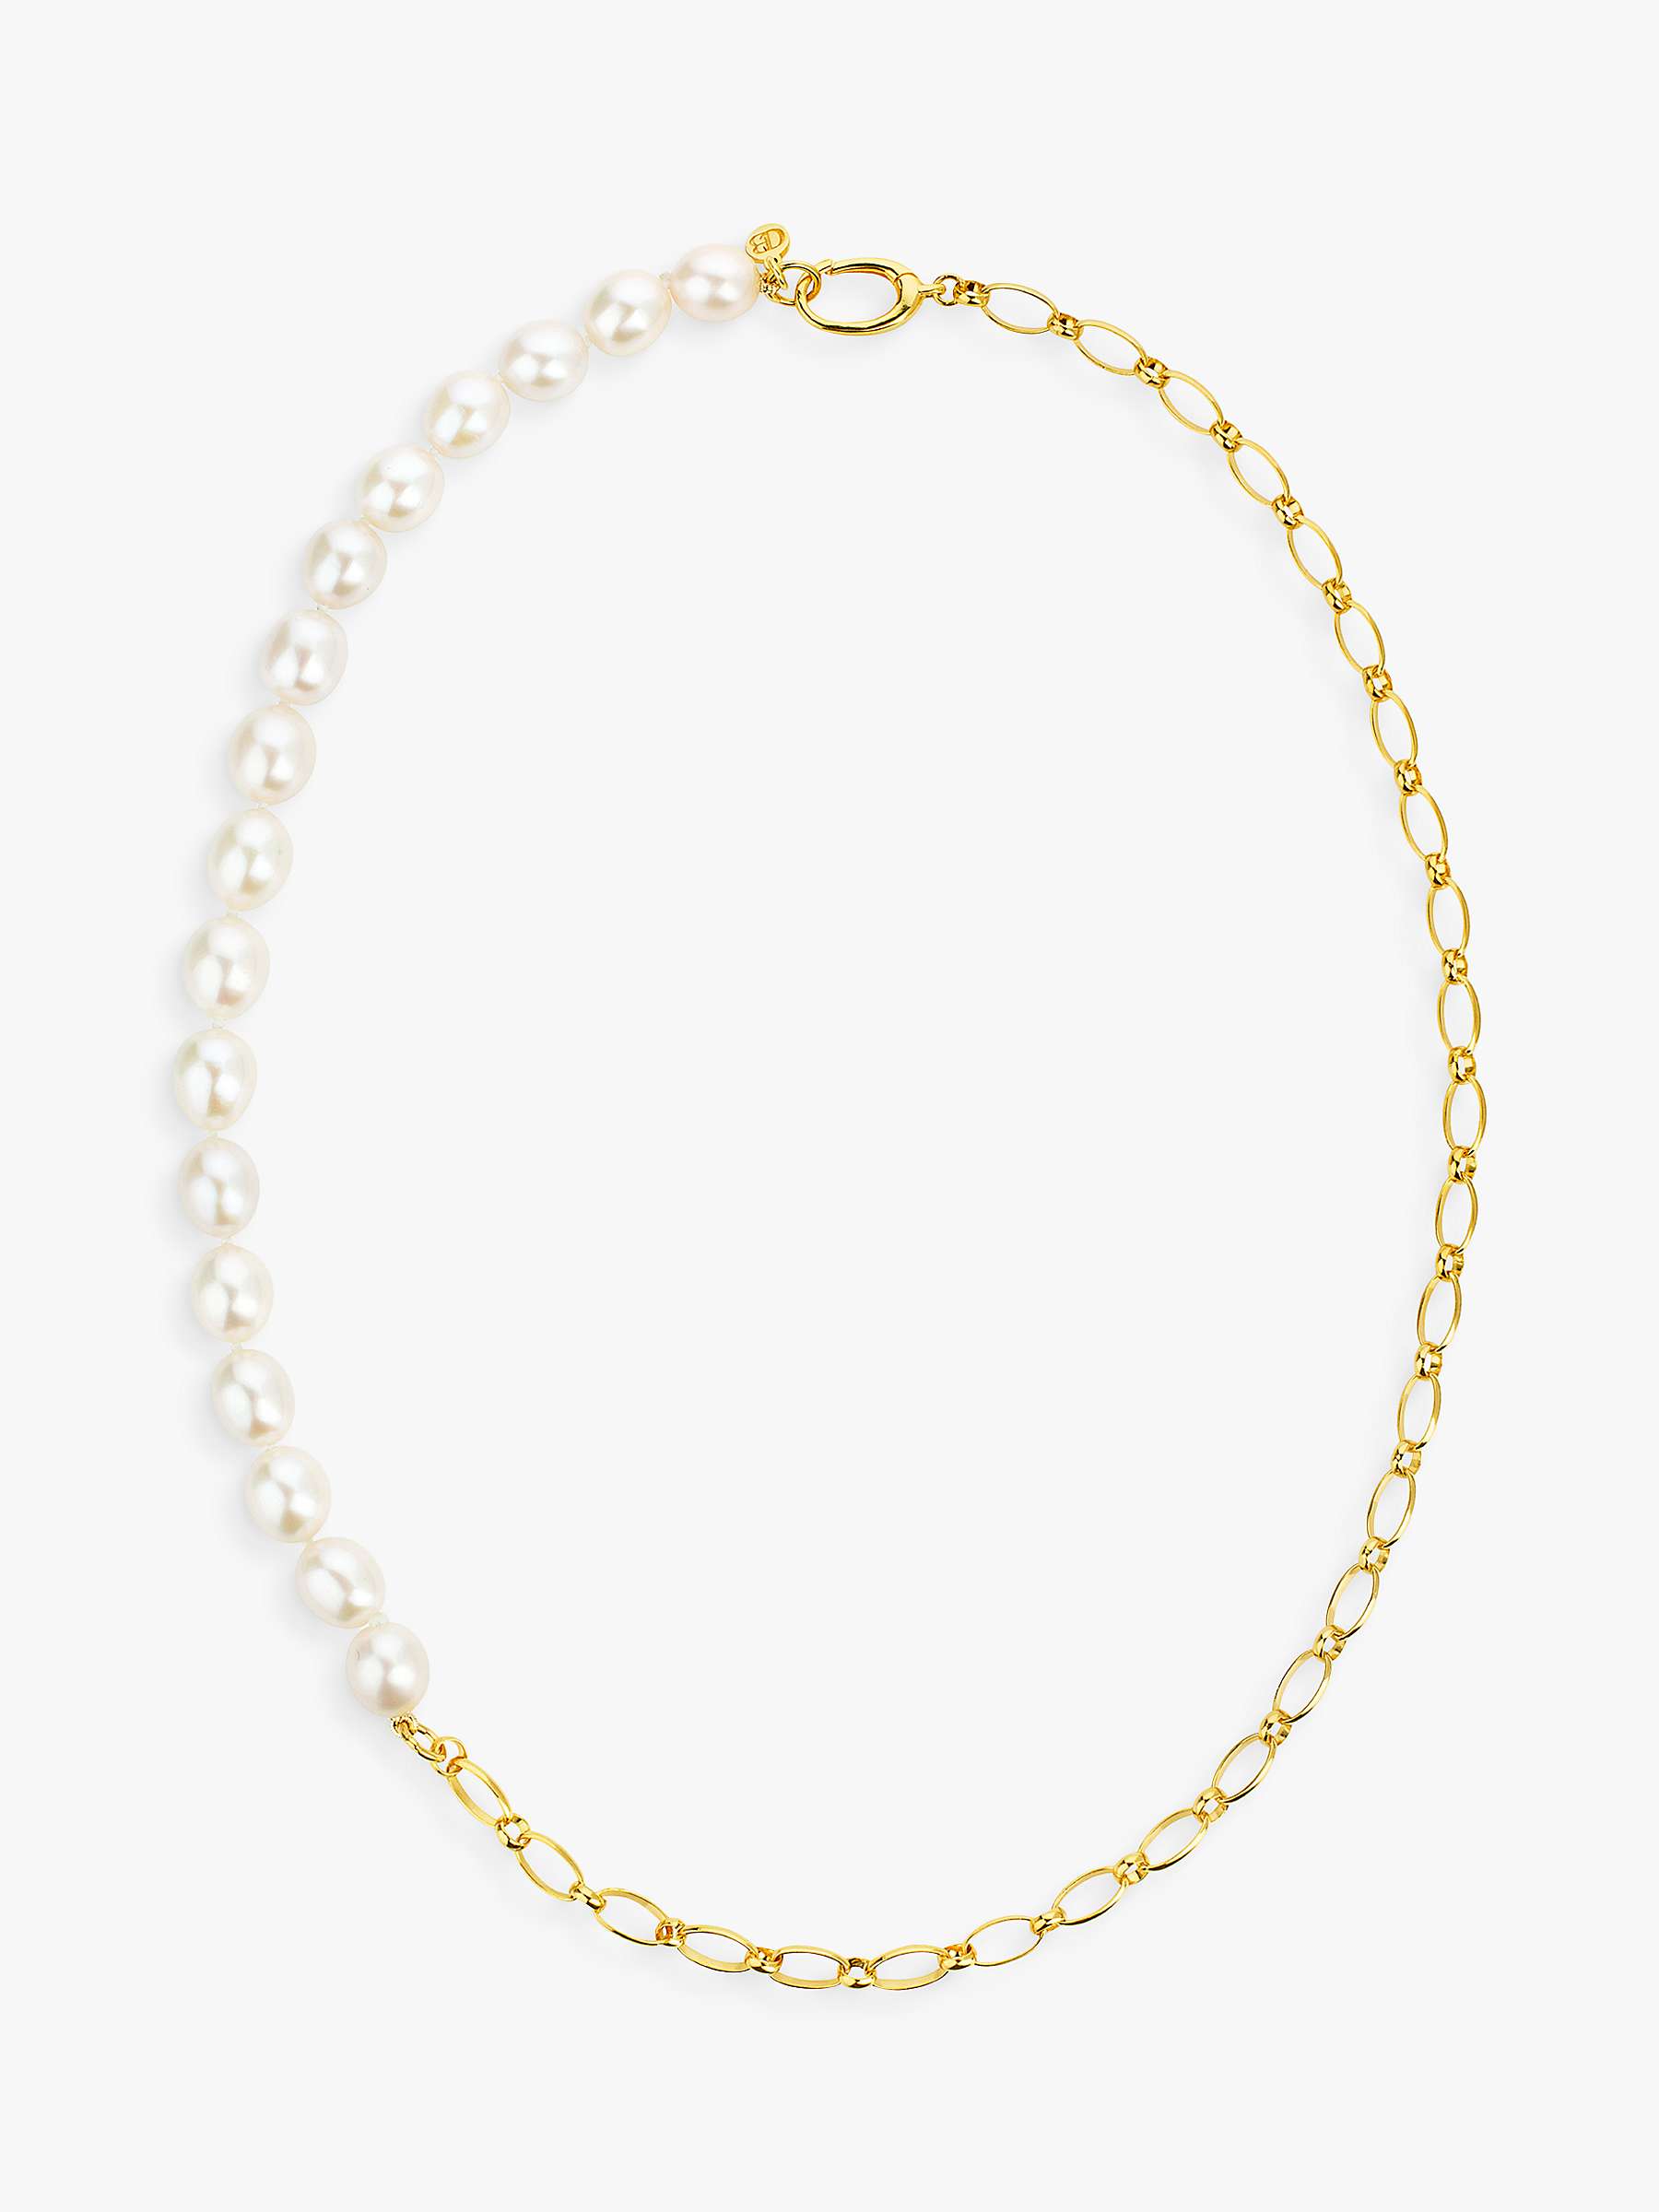 Buy Claudia Bradby Modern Freshwater Pearl Beaded Chain Necklace, Gold Online at johnlewis.com